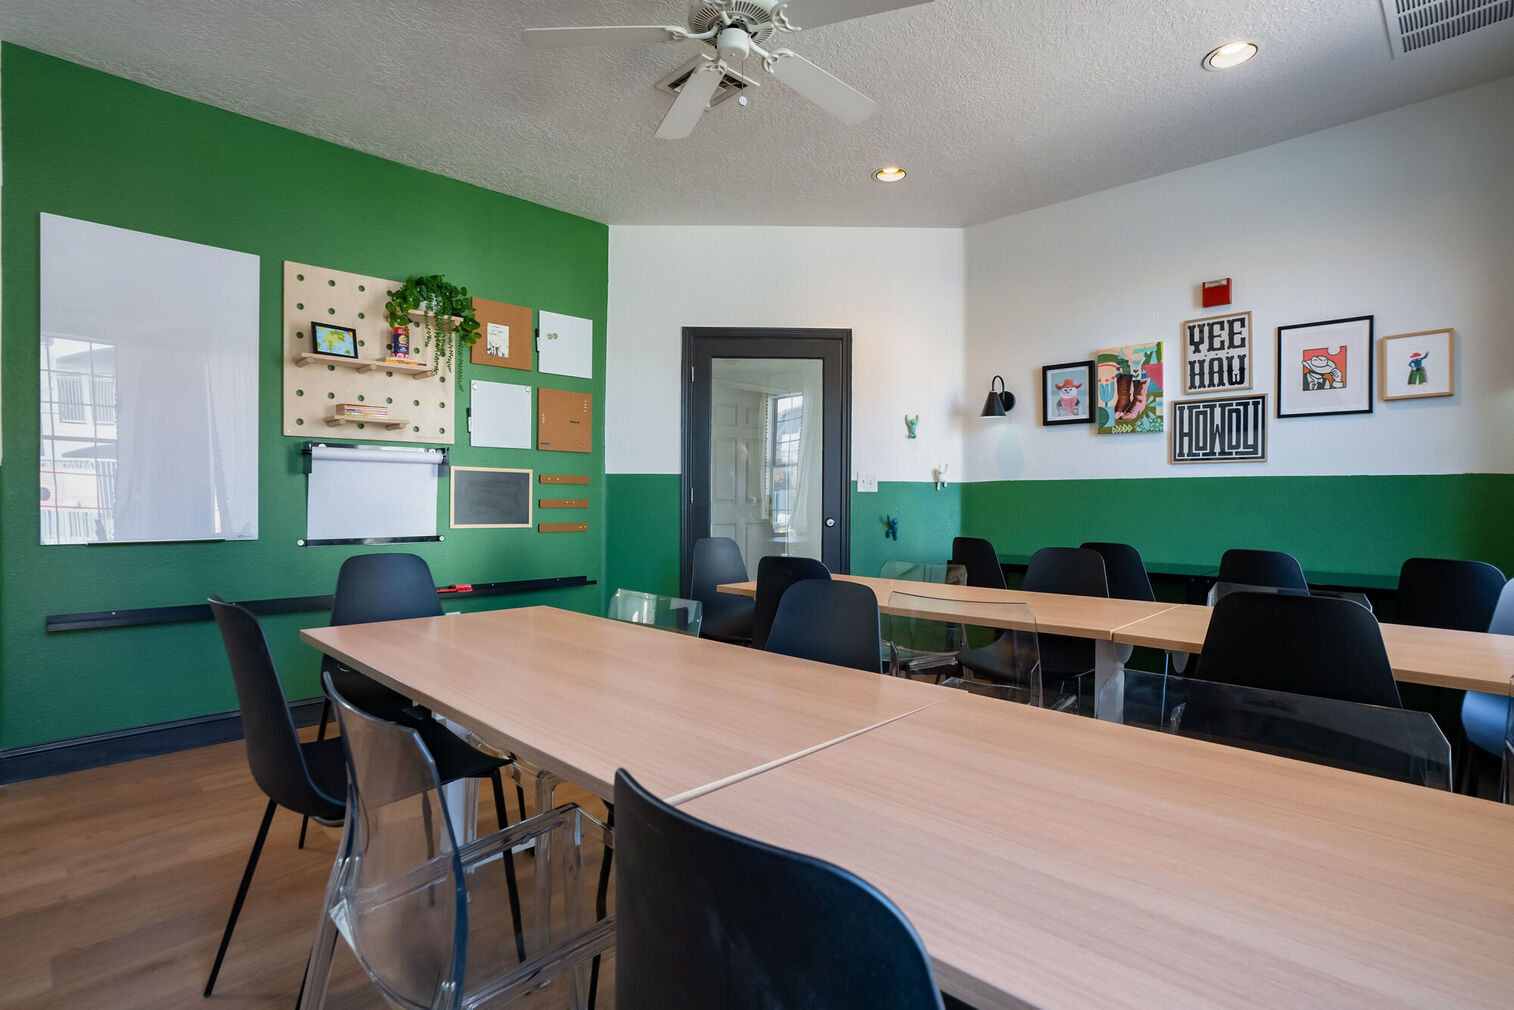 Kids club room with desks and chairs, craft supplies and games